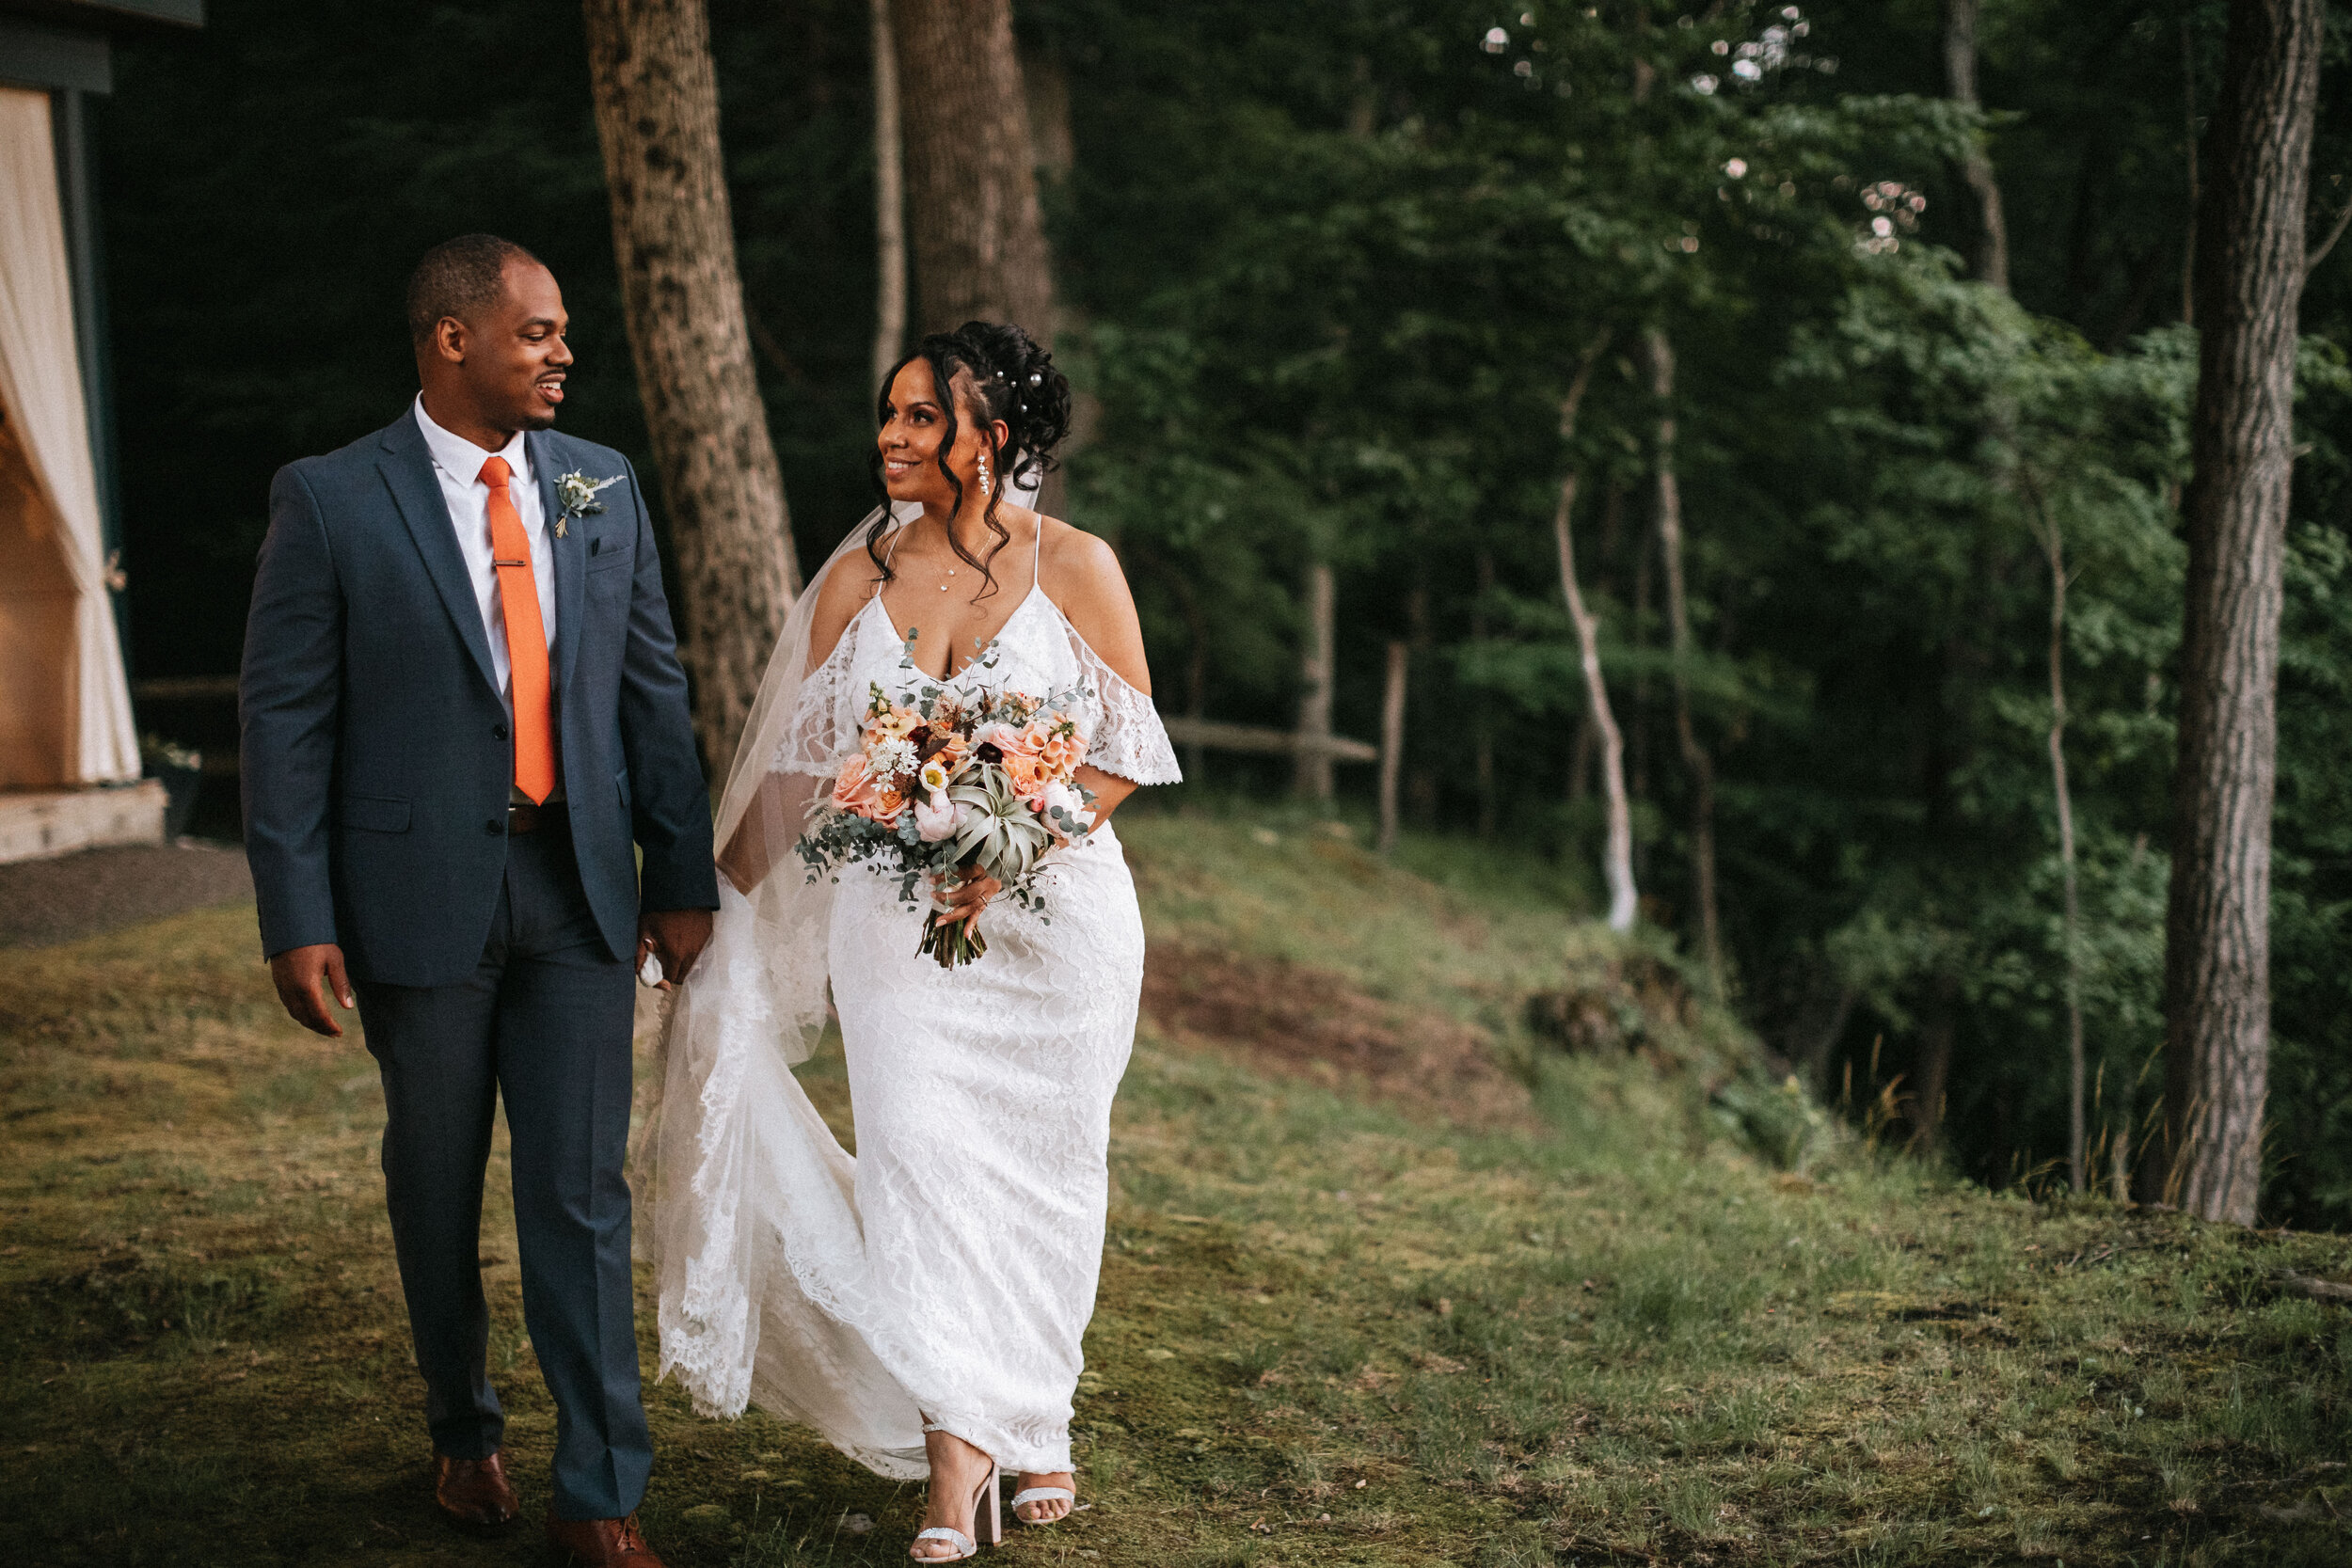 Nestled in the Pocono Mountains and surrounded by their closest loved ones, Melissa and Jaquion said their vows as they overlooked the Appalachian trail at the intimate Promise Ridge in Stroudsburg, Pennsylvania.